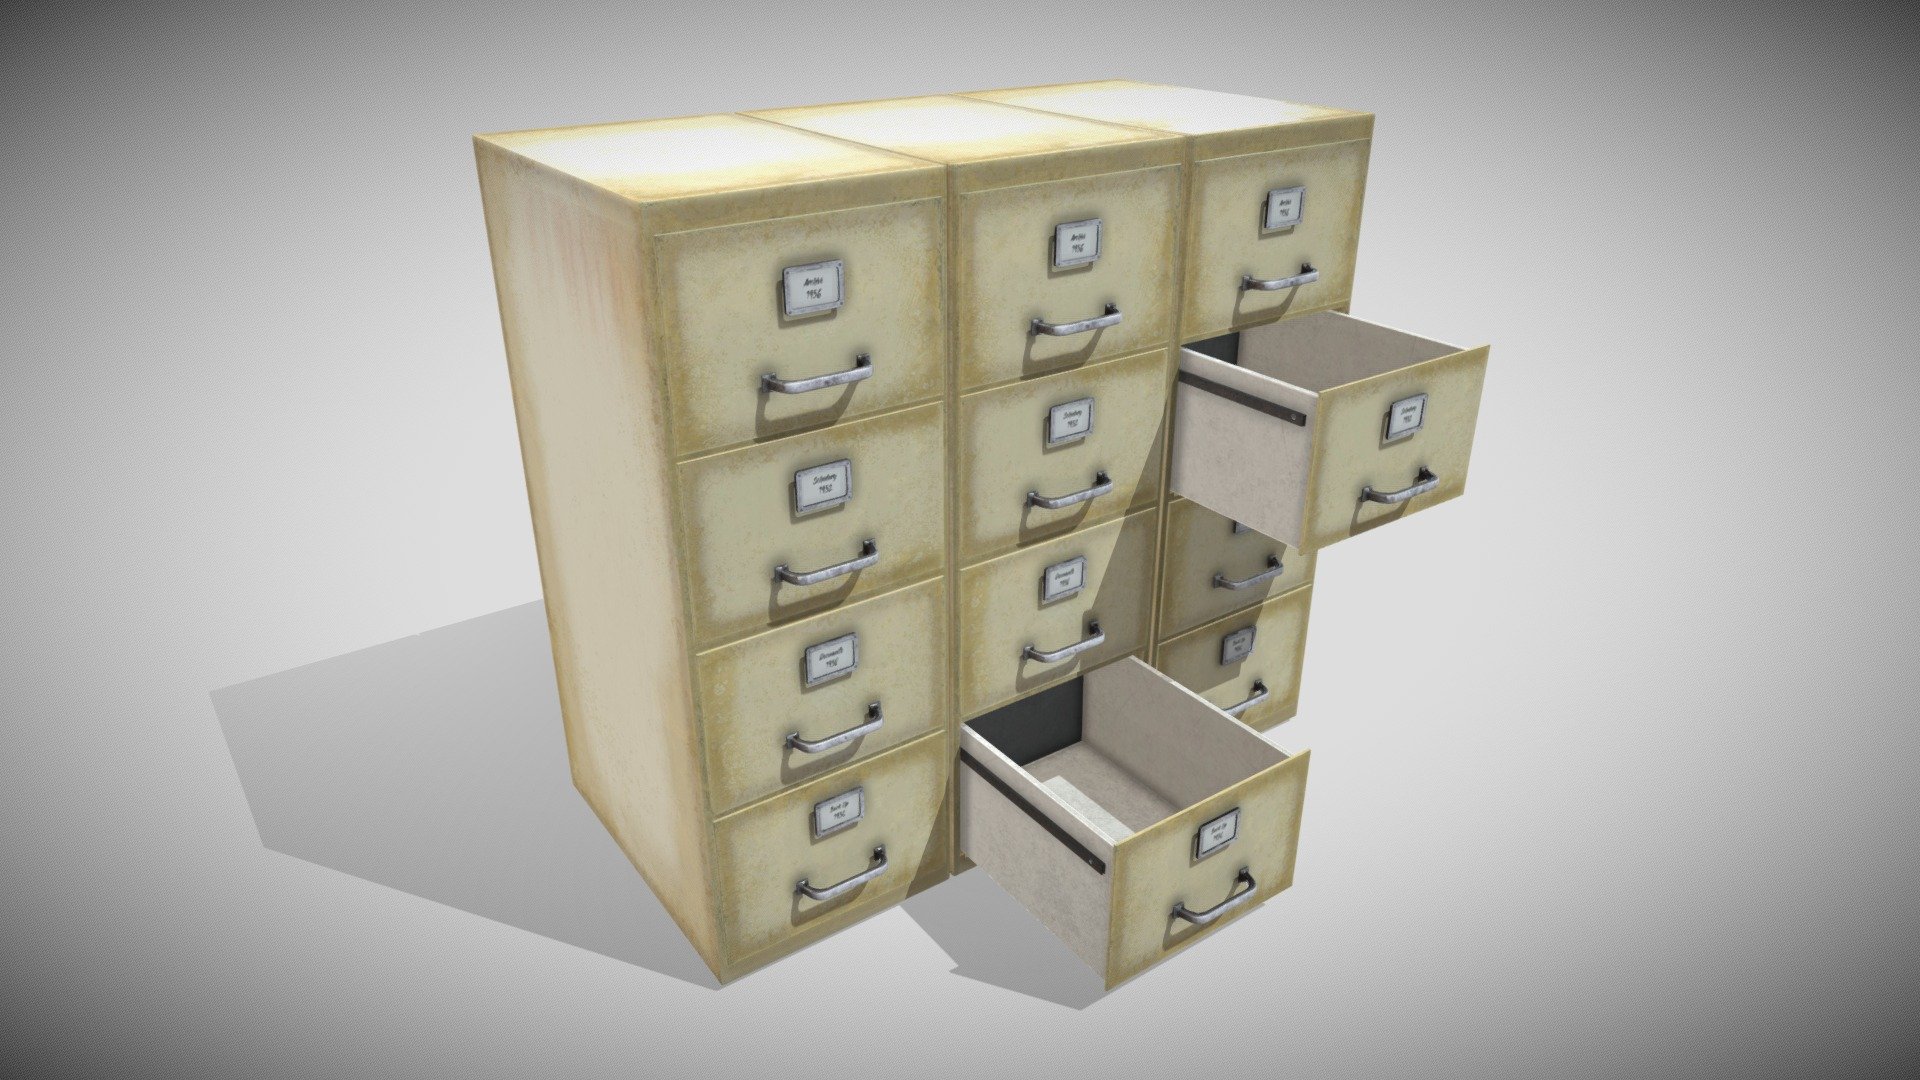 One Material 4k PBR Metalness

Attached Id Map and PhotoShop Levels File to change Stickers......

Drawers can be opened - Drawer Quad - Buy Royalty Free 3D model by Francesco Coldesina (@topfrank2013) 3d model